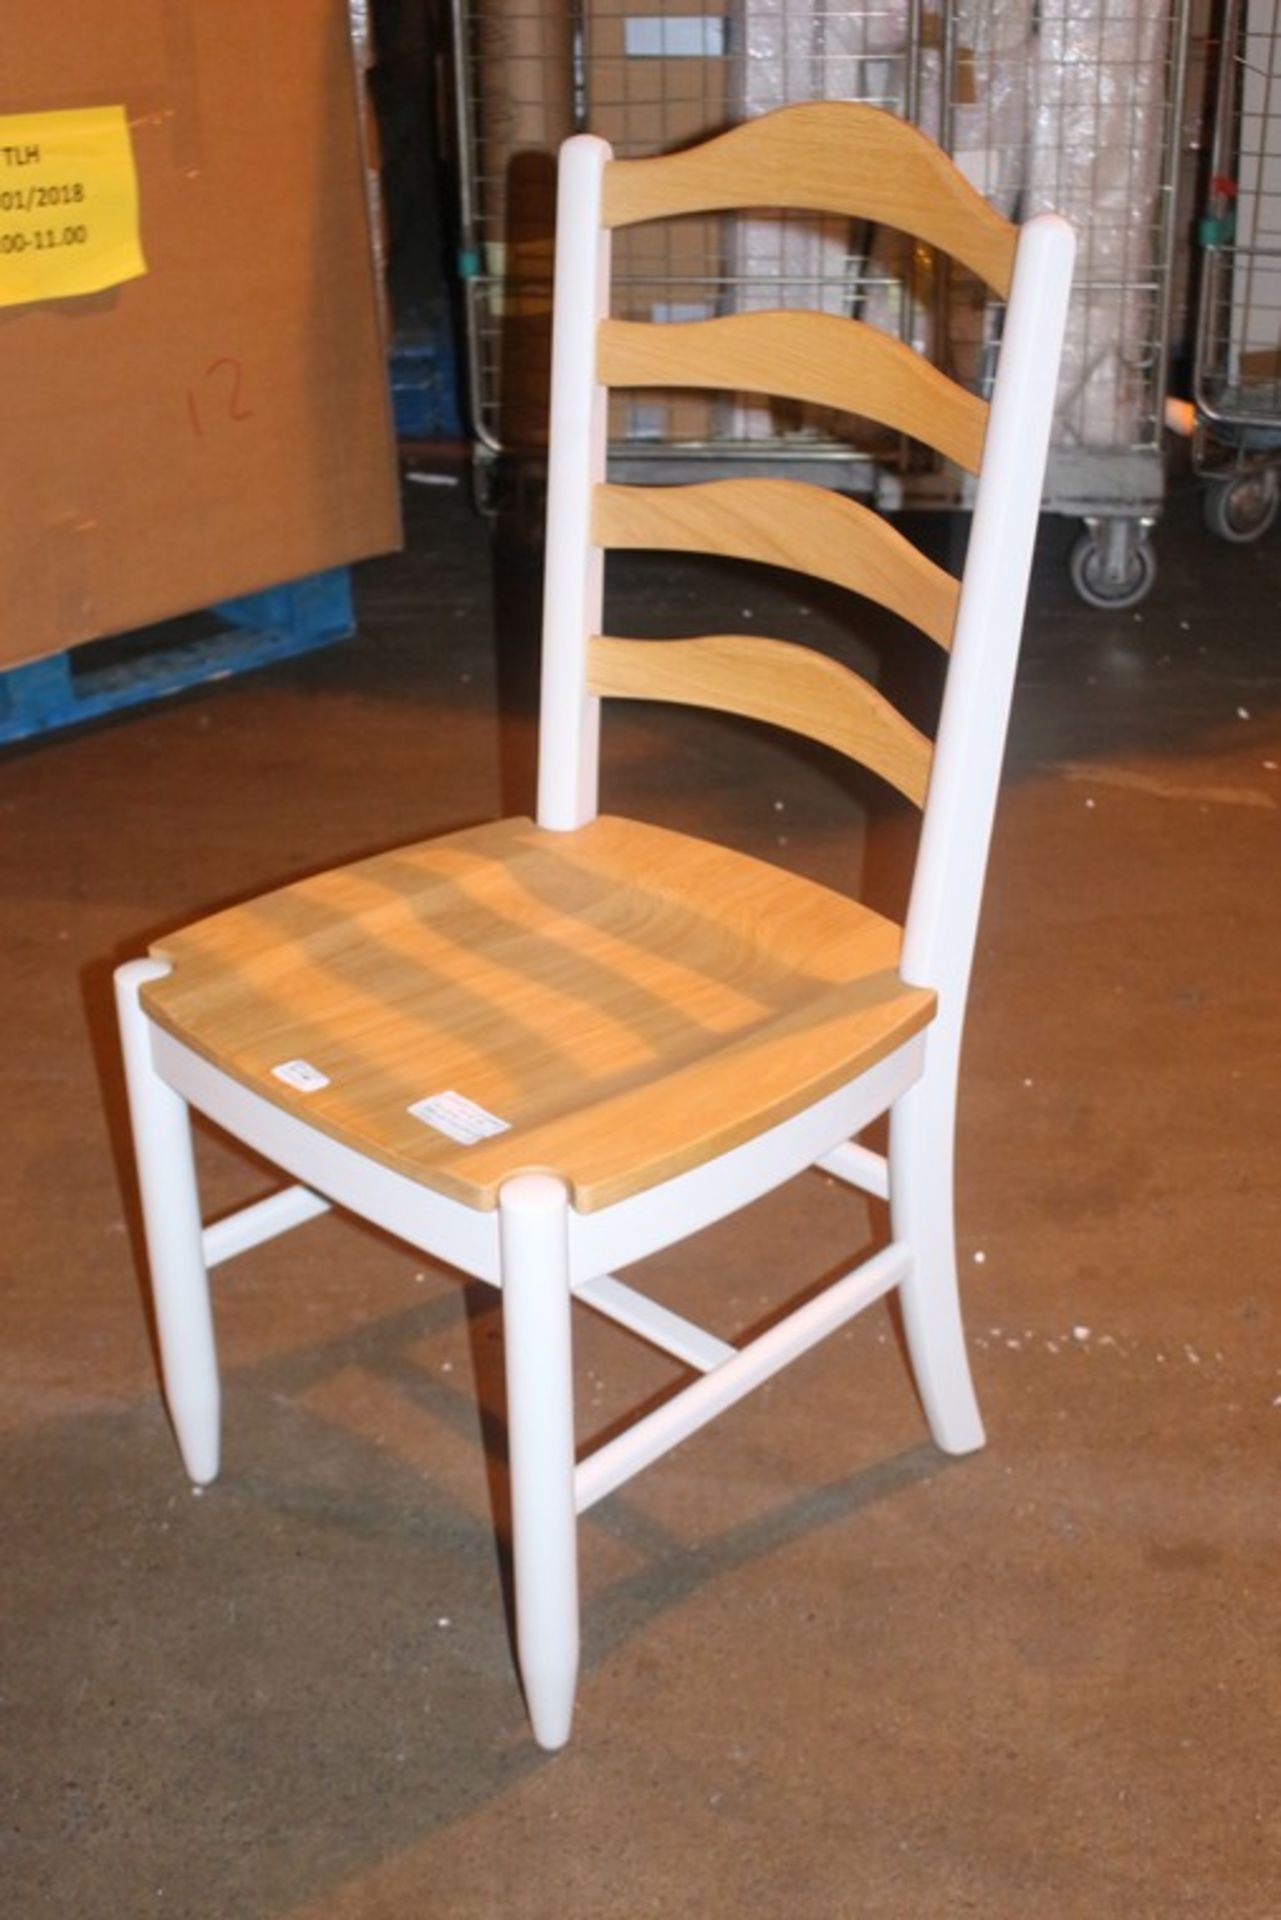 1 x JOHN LEWIS SLAT BACK DINING CHAIR RRP £100 (02.01.18) *PLEASE NOTE THAT THE BID PRICE IS